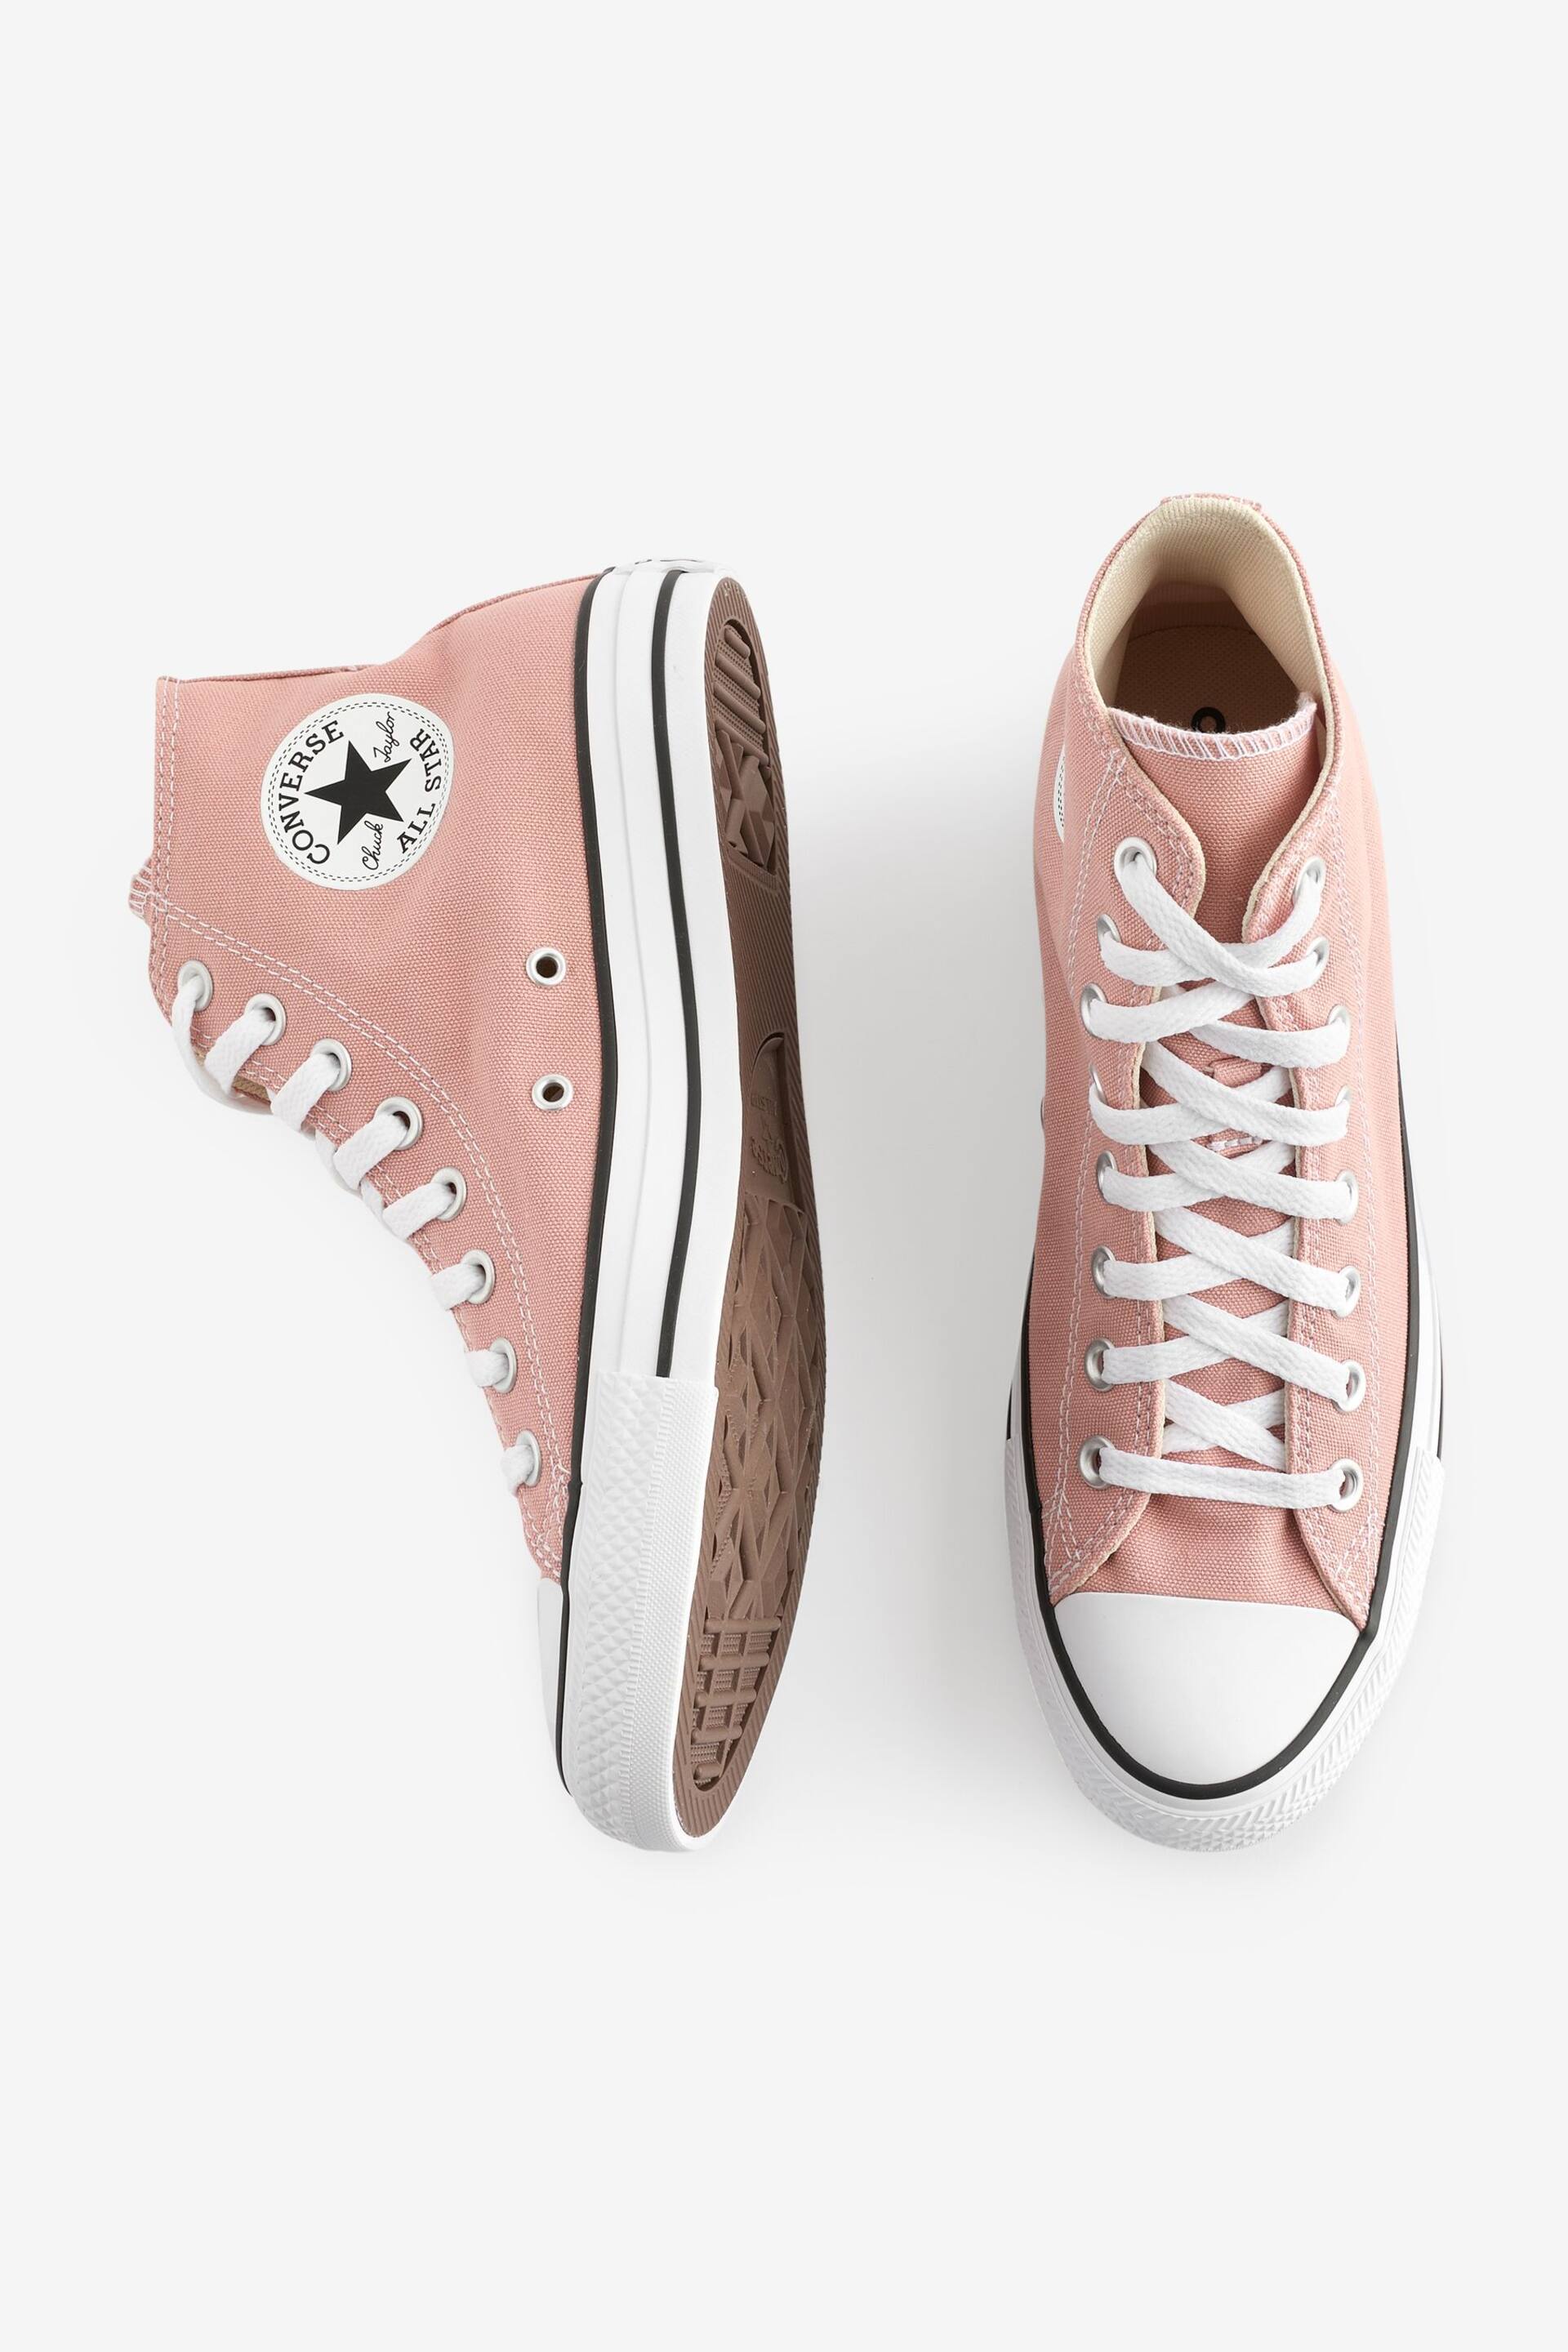 Converse Light Pink Chuck Taylor All Star High Trainers - Image 4 of 9